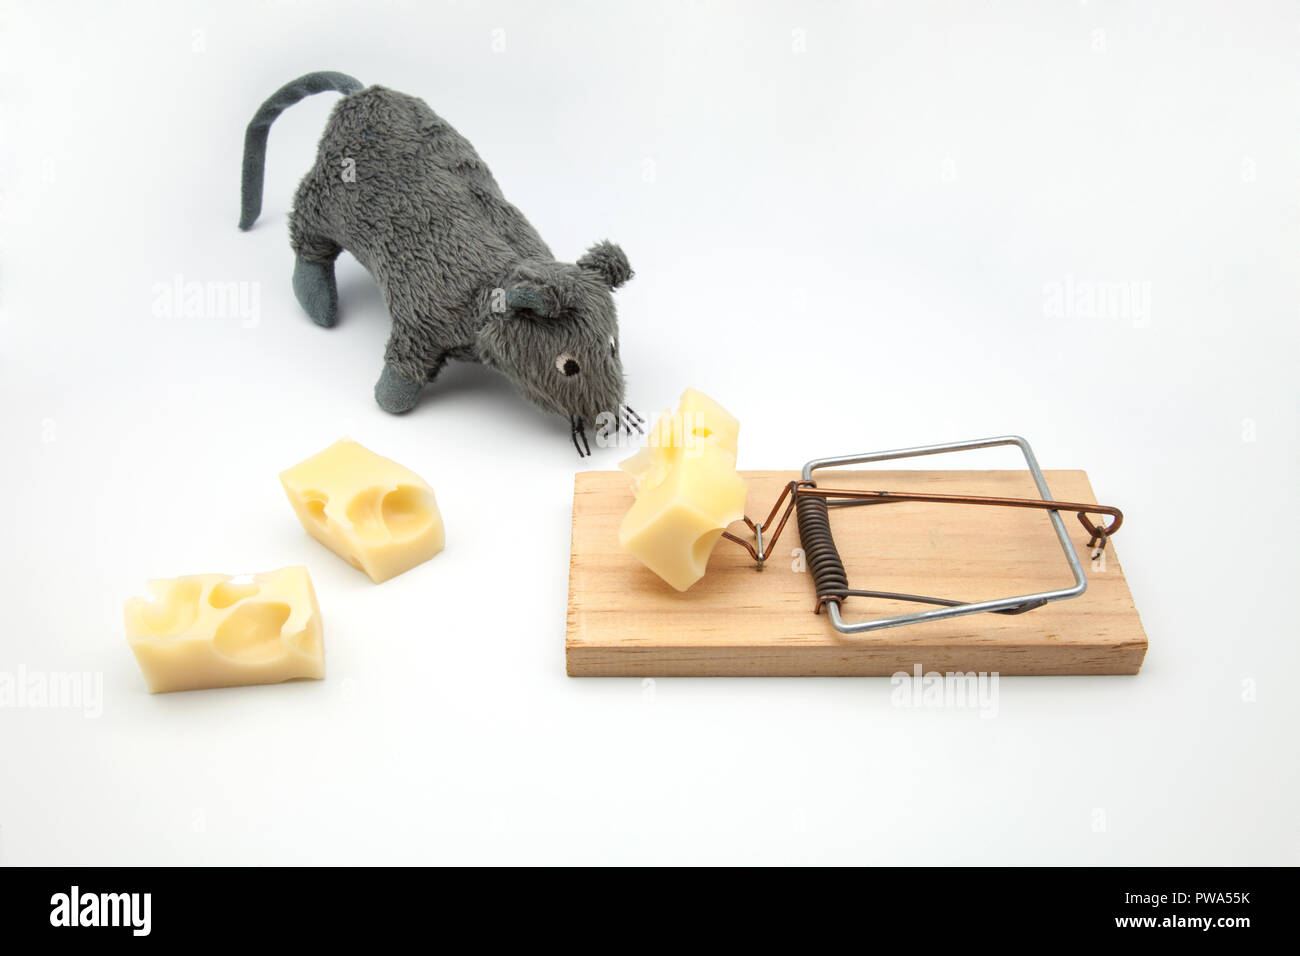 mouse of cloth and pitfall with cheese Stock Photo